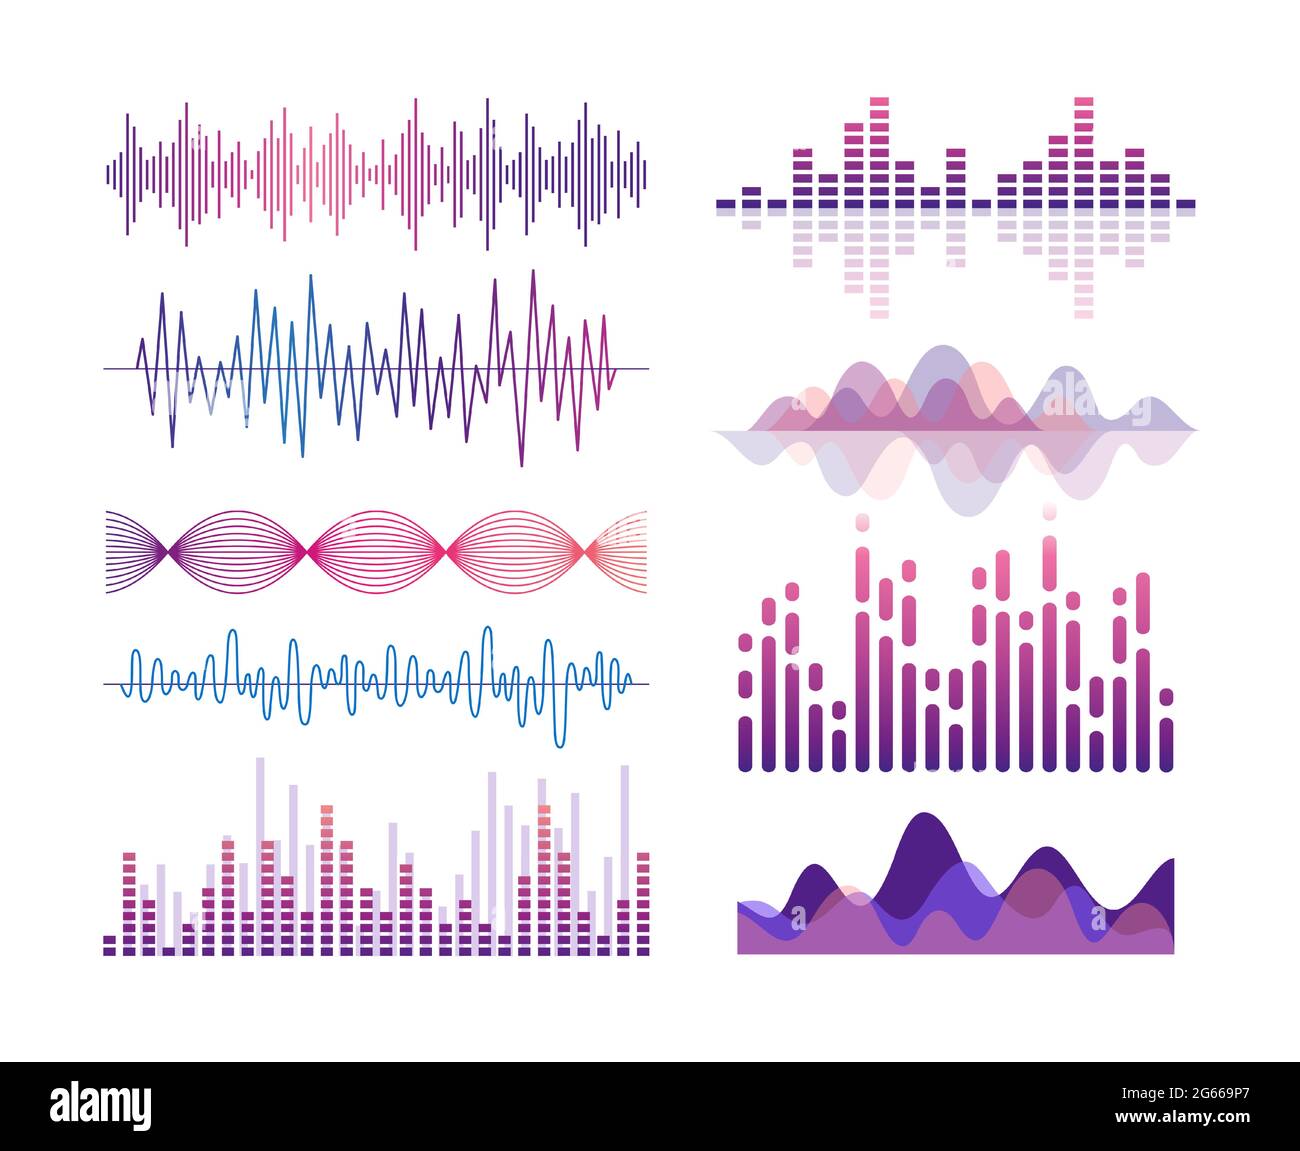 Sound waves vector color illustrations set. Audio effects visualization. Music player equalizer. Song, voice vibration. Violet lines and curves Stock Vector